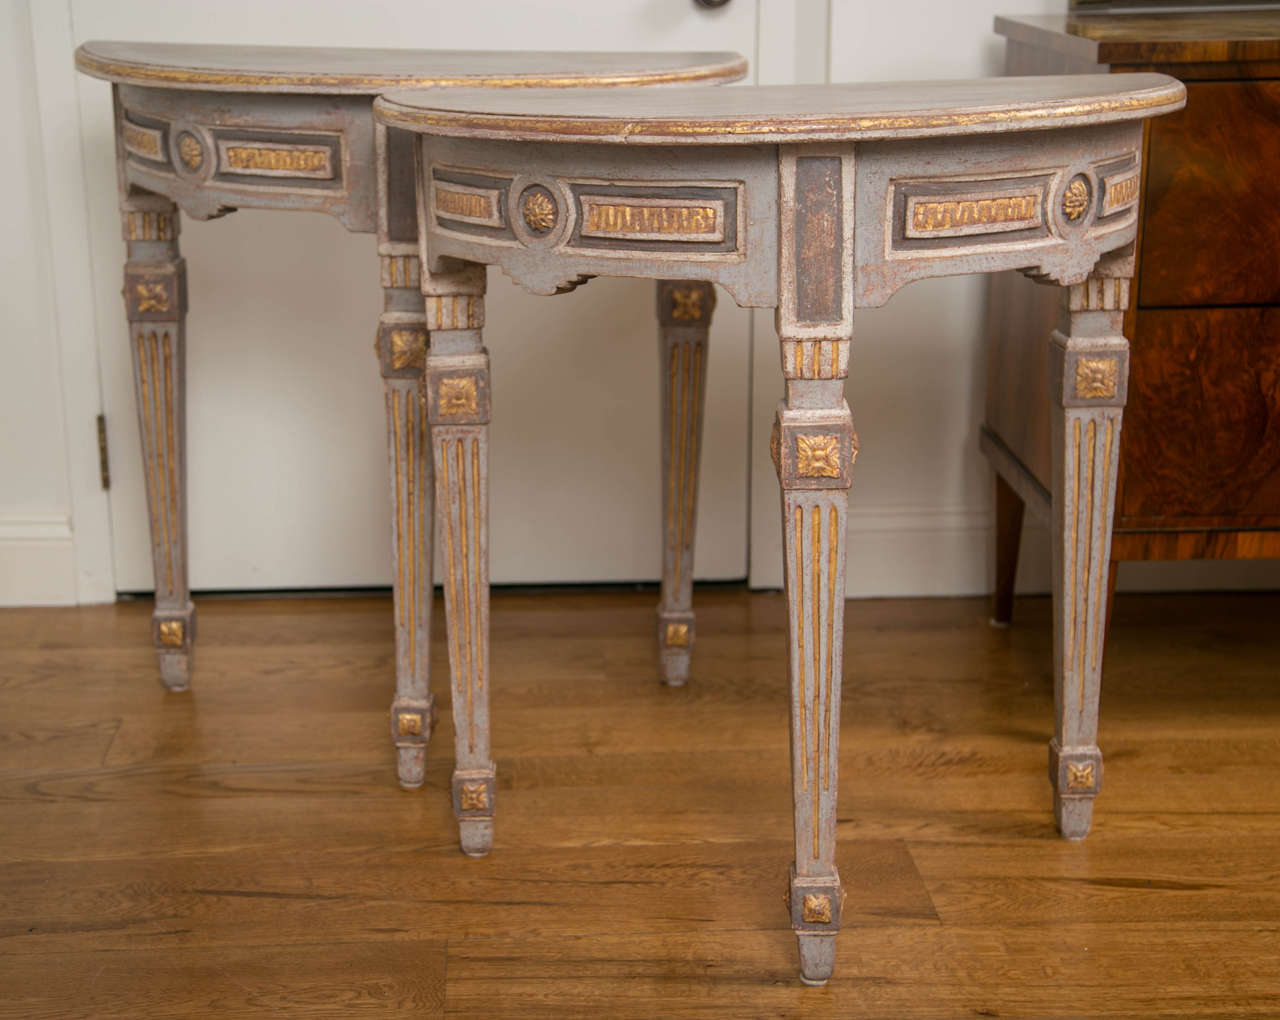 A wonderful pair of Baltic greige painted d-shaped consoles, each on three ample squared and tapered legs embellished with gilded carvings typical of the Louis XVI period, Germany, last quarter of 18th century. Paint has been refurbished.